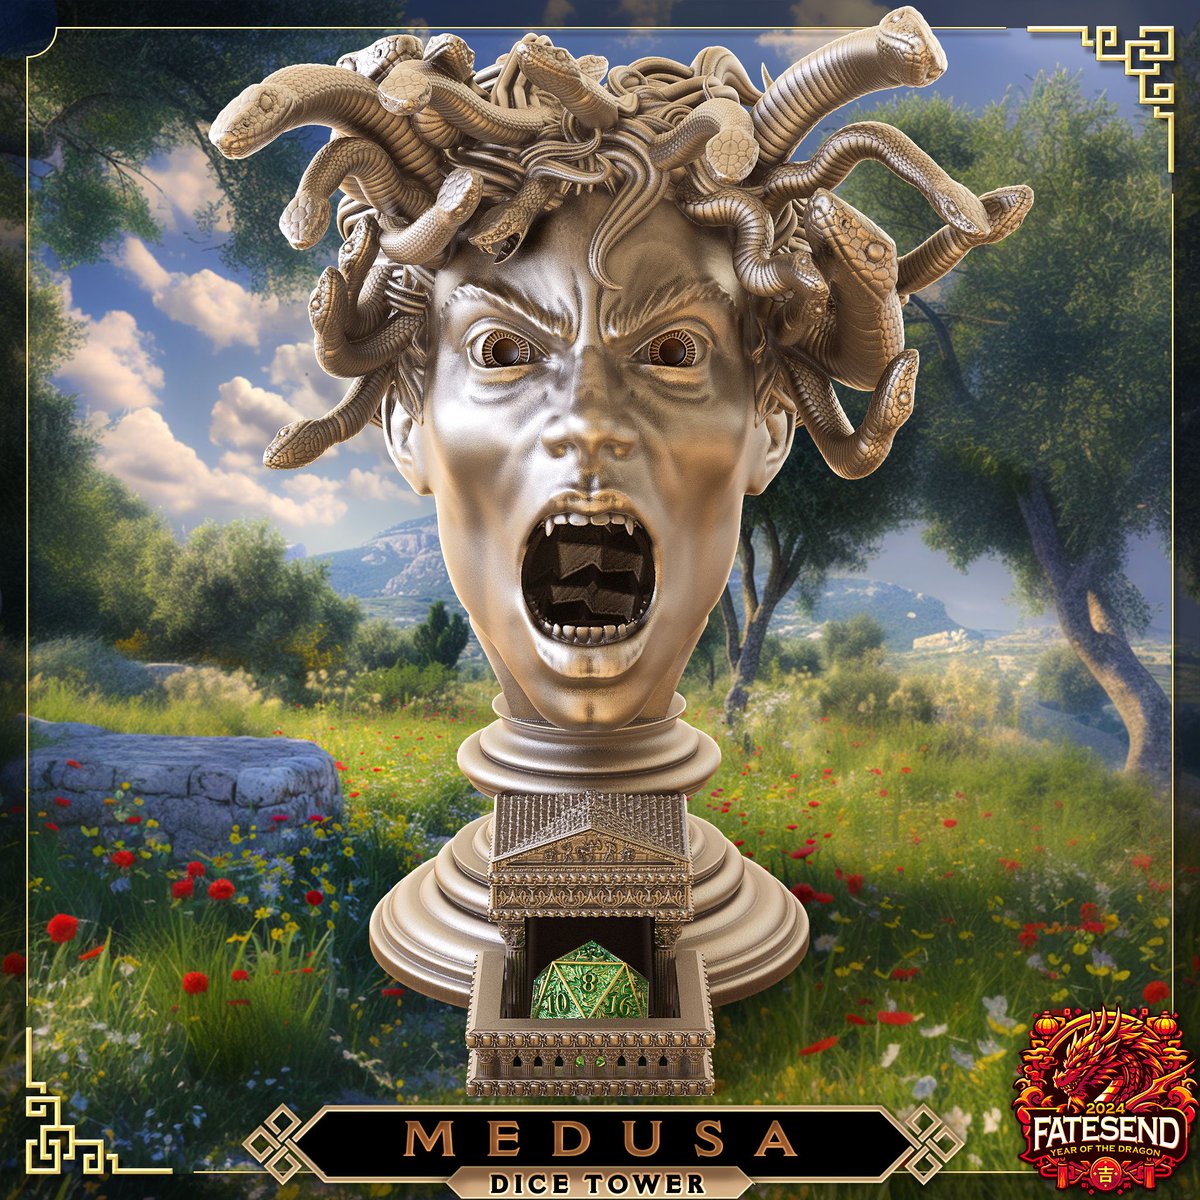 🐍 Will your rolls be petrified or will they charm their way to victory? Dare to meet Medusa's gaze and unlock exclusive designs by joining our Patreon or Tribe today!  linktr.ee/fatesend 

#Medusa #dicetower #3dprinting #dnd #dungeonsanddragons #rpg #TTRPG